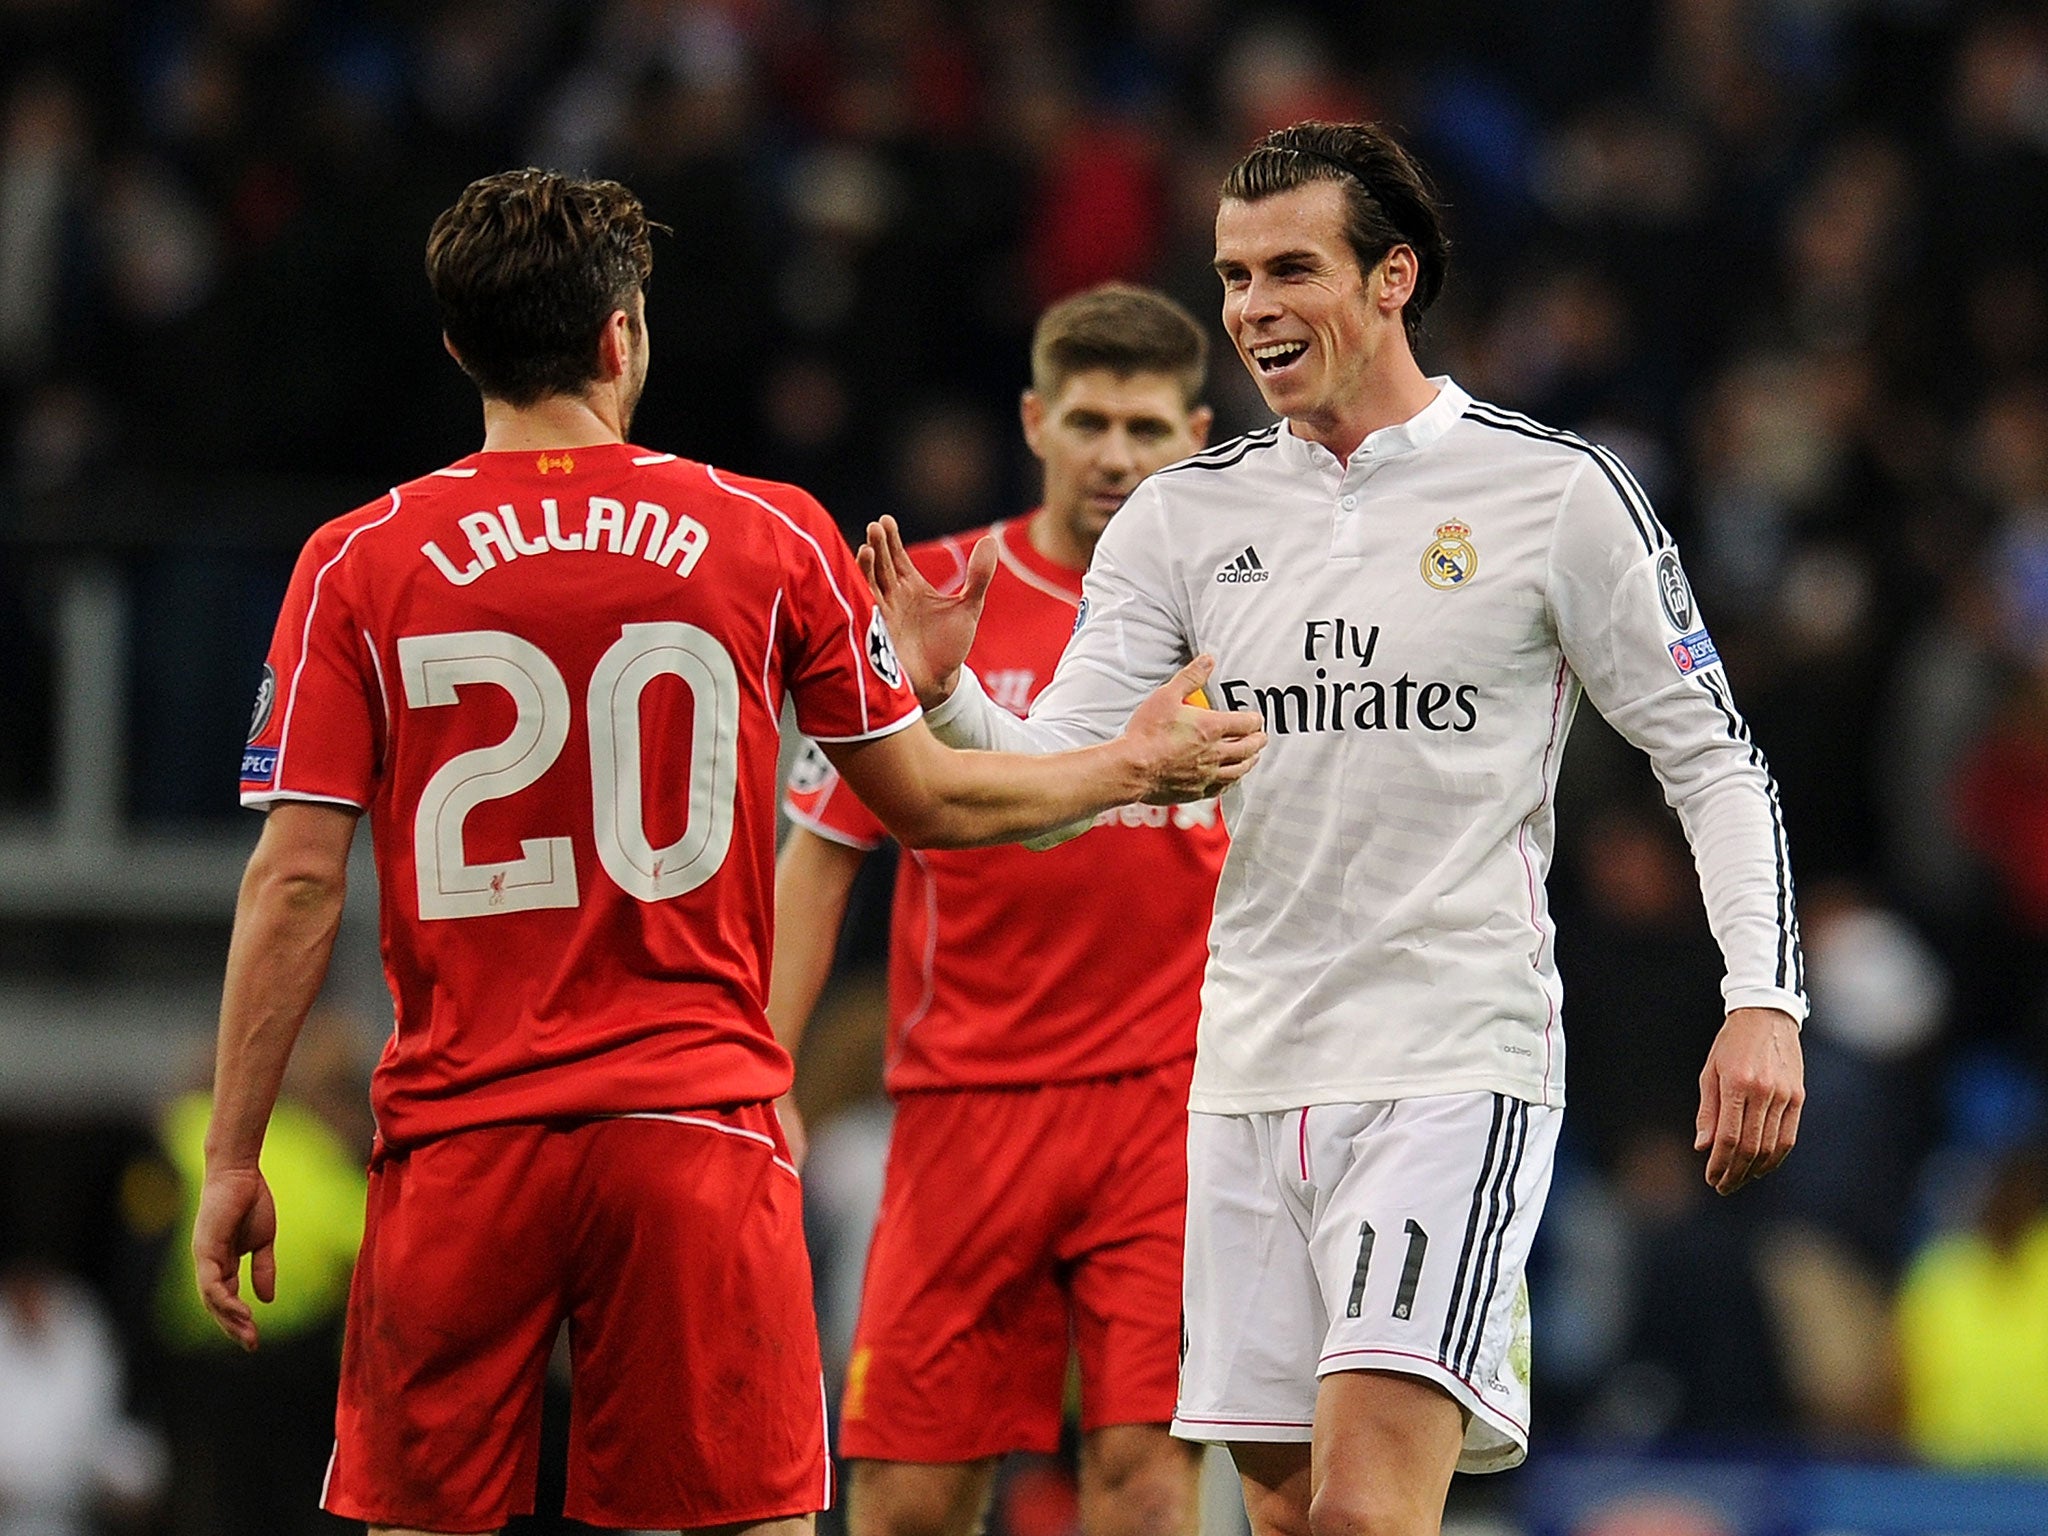 Gareth Bale (right) speaks with Adam Lallana after the match